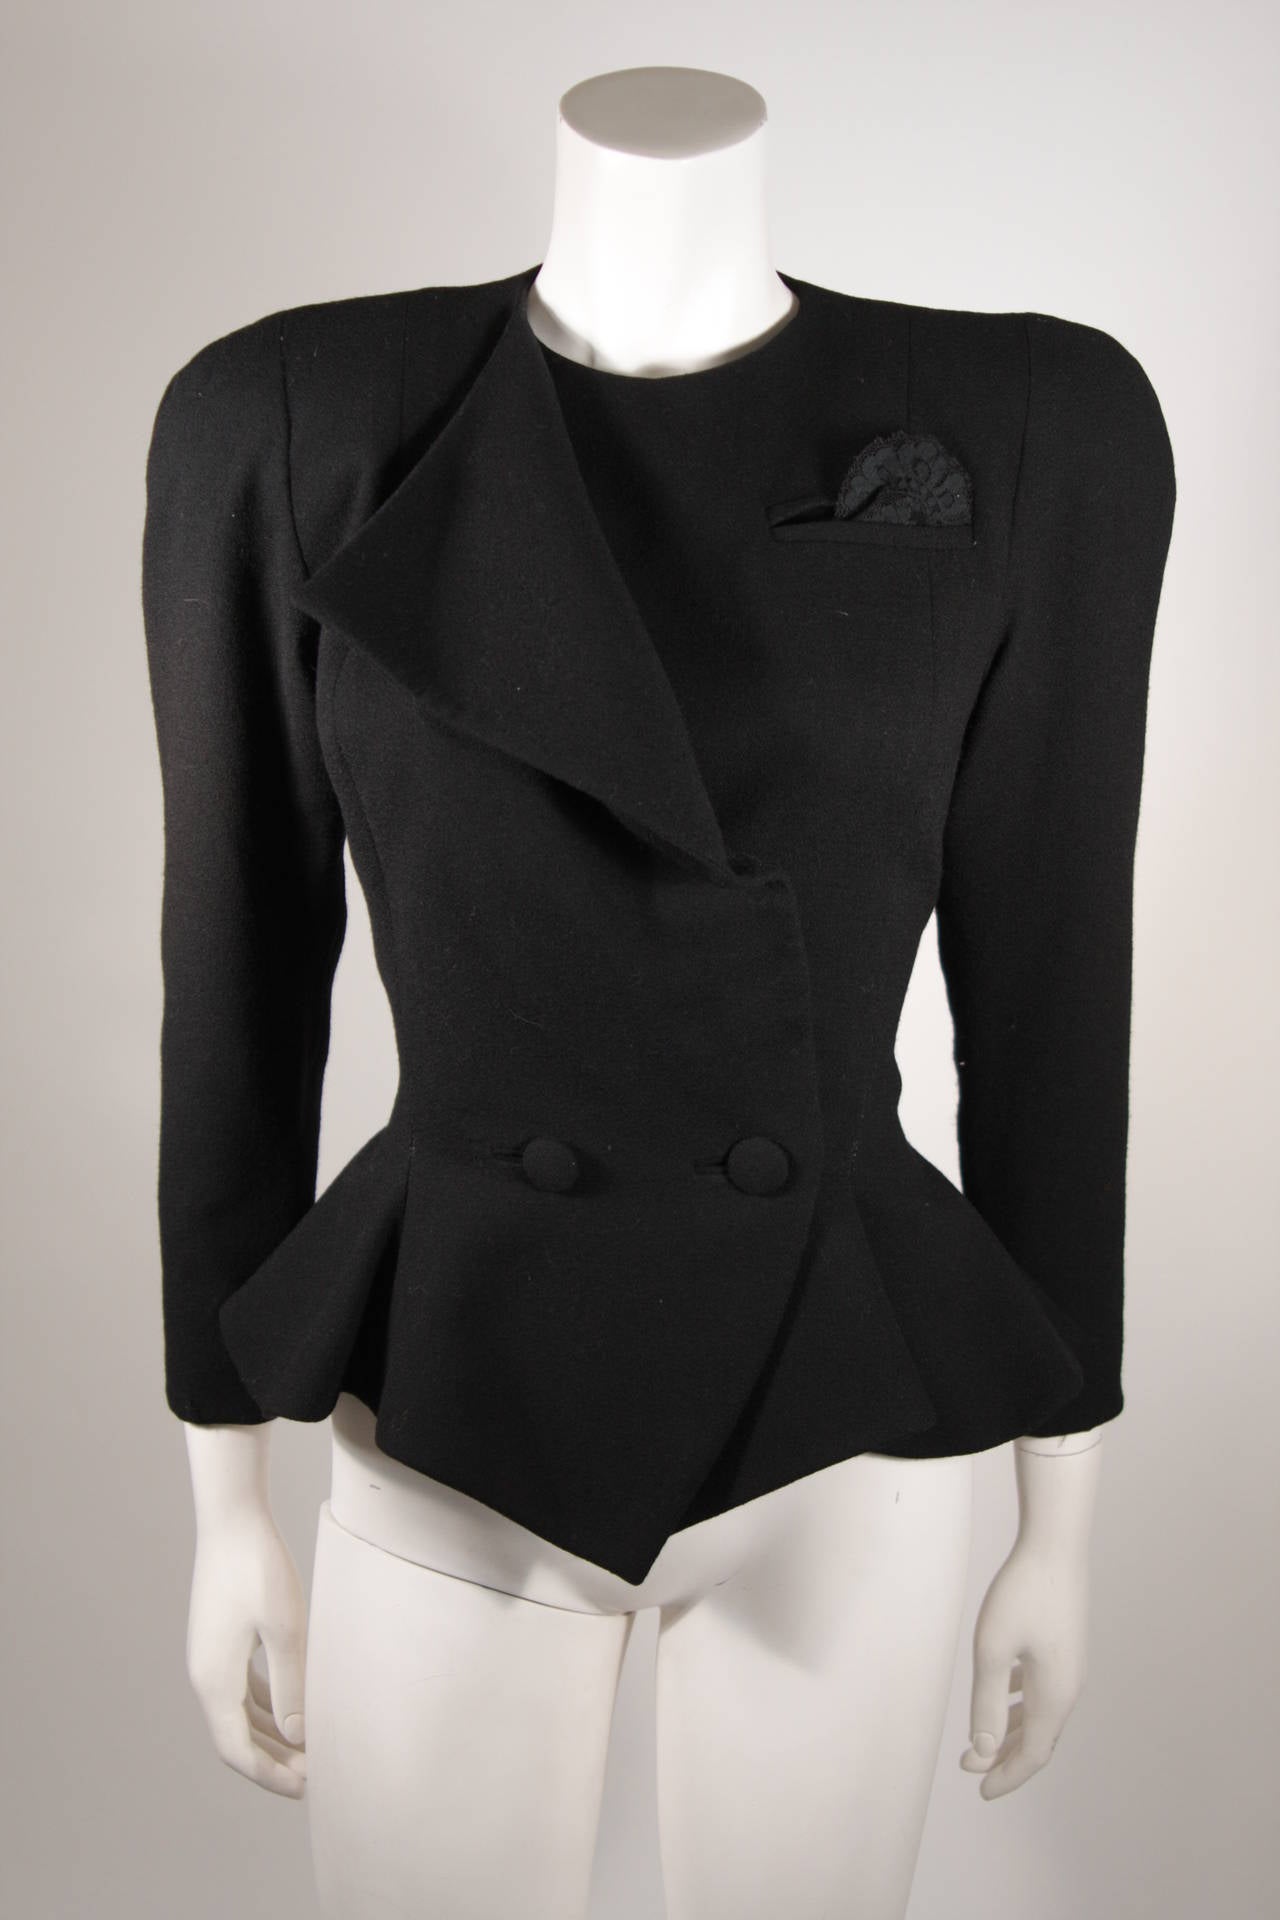 Travilla Black Structured Skirt Suit Size 8 For Sale 3